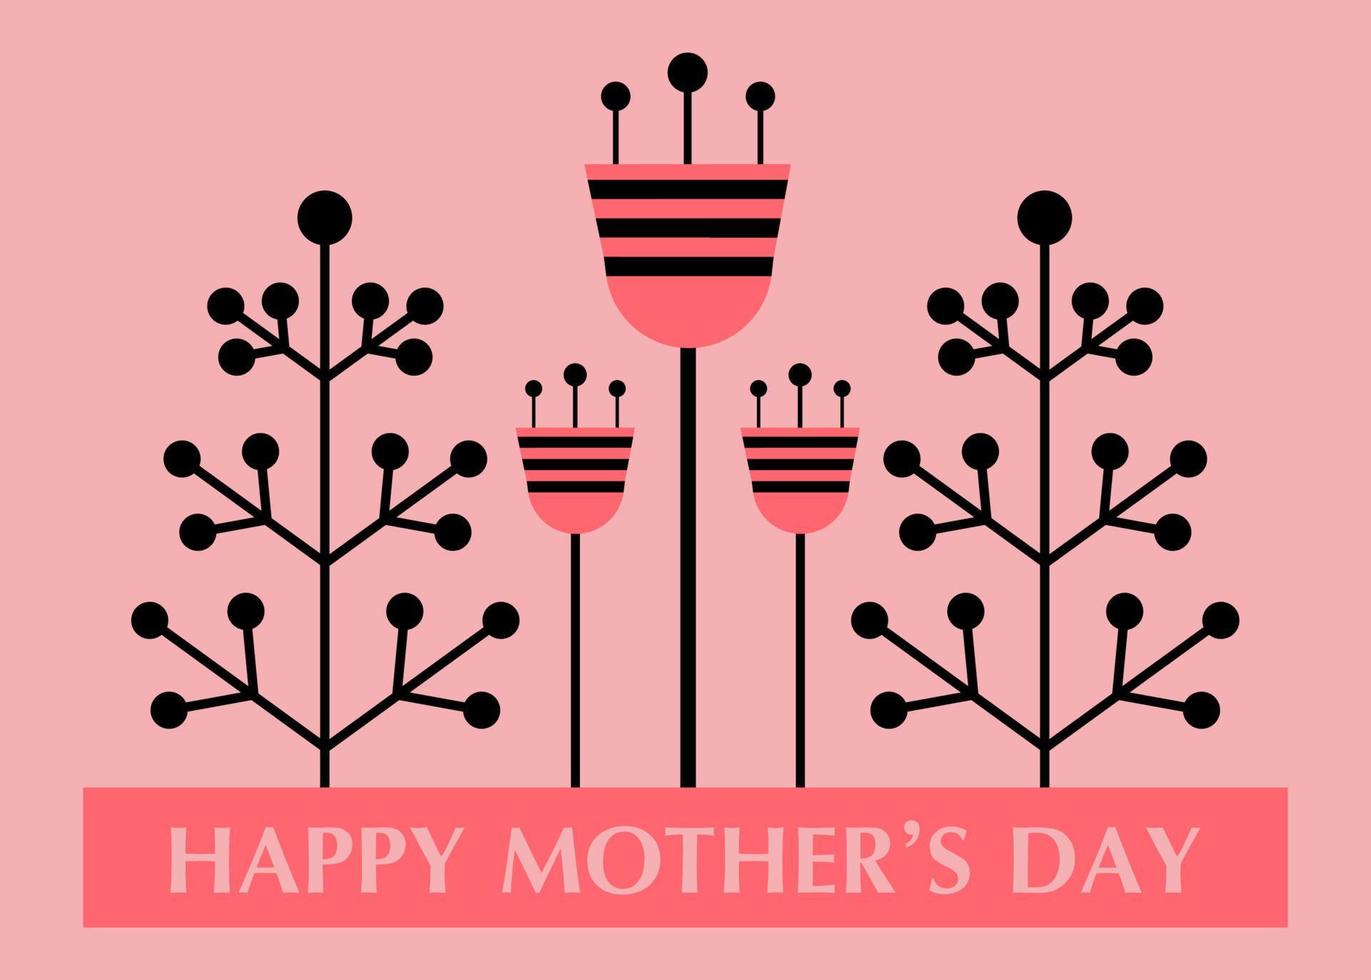 Mothers day greeting card with minimalistic style flowers vector isolated illustration